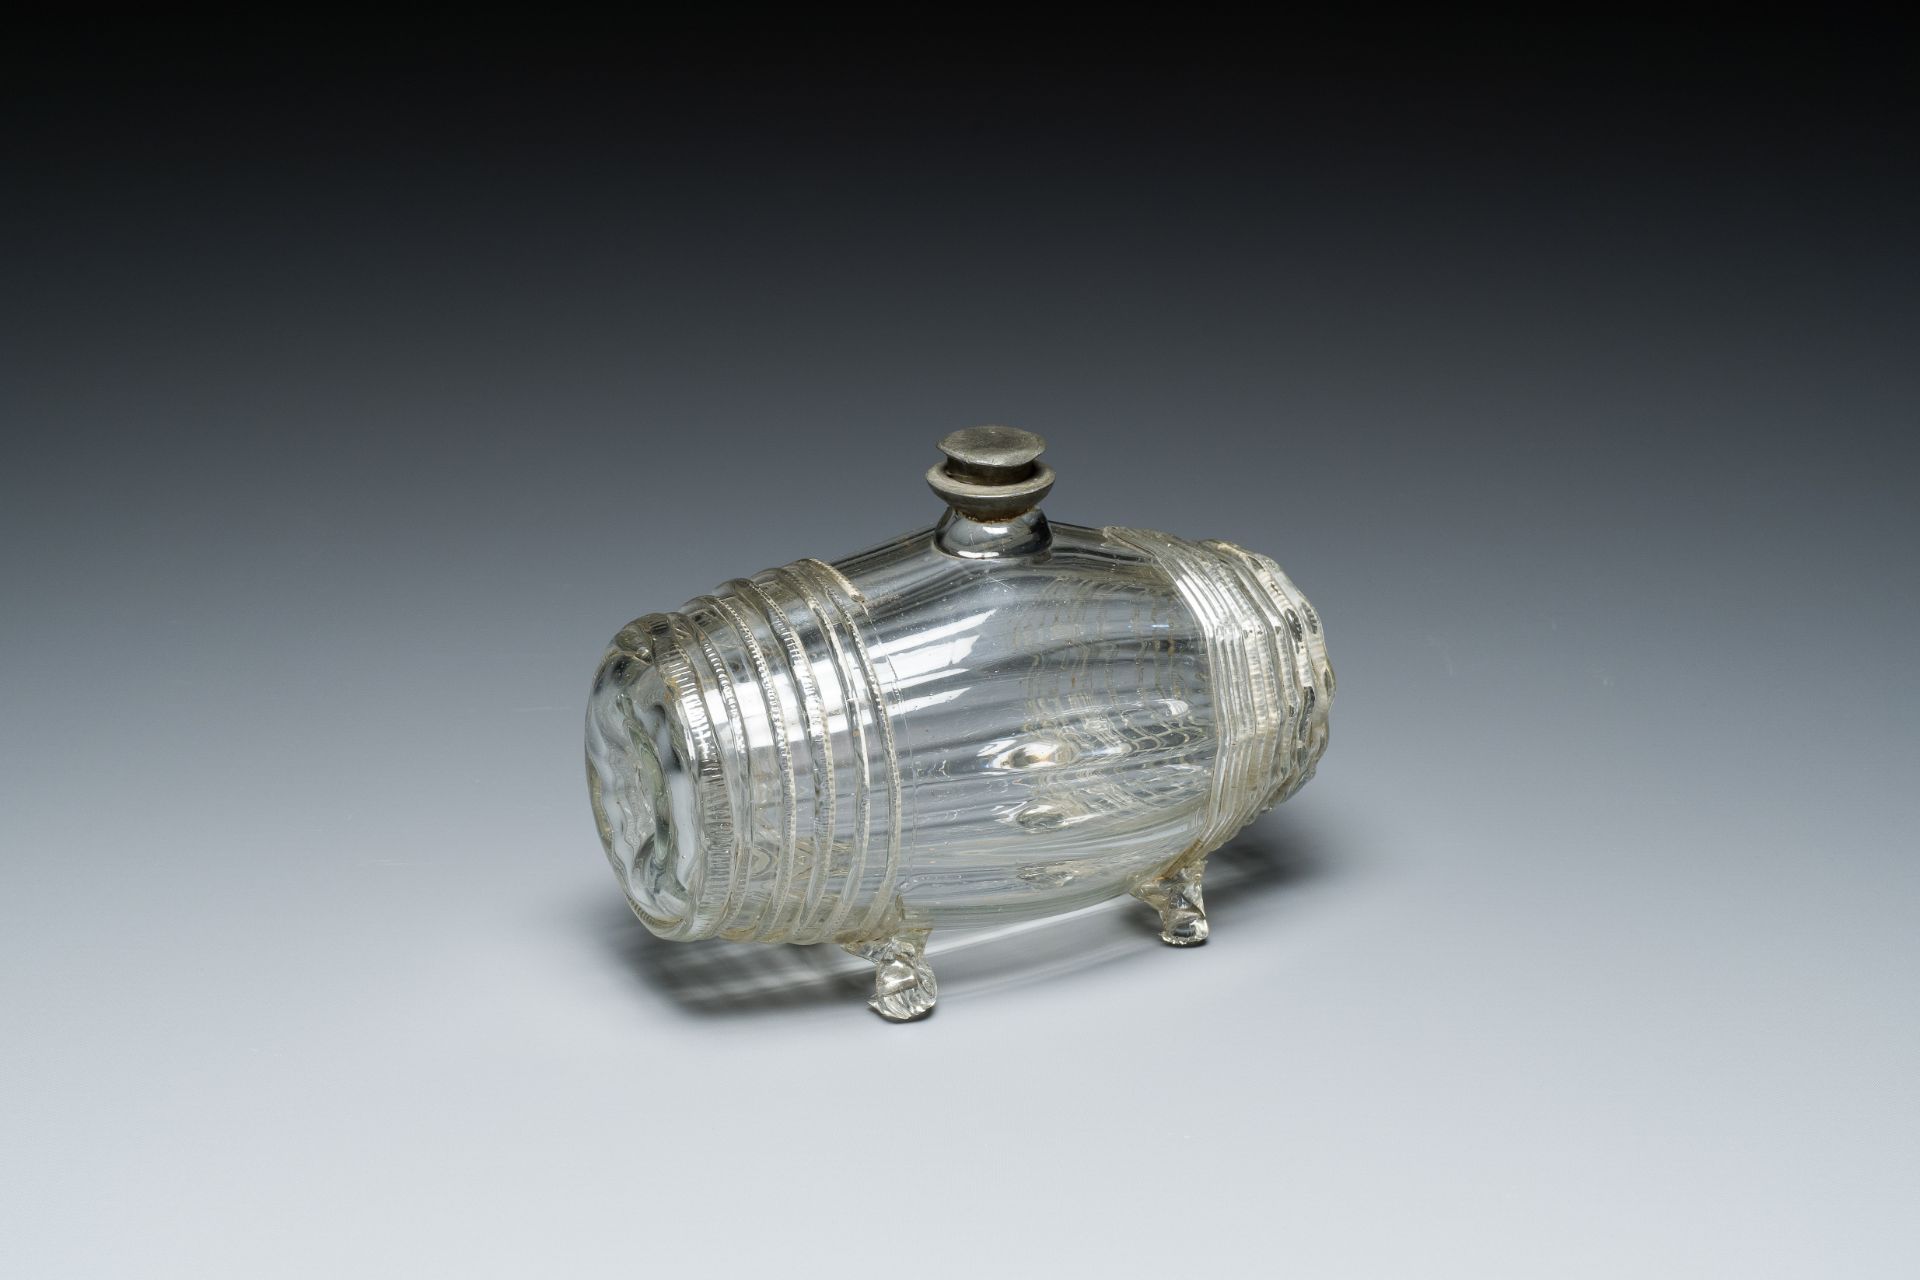 A German barrel-shaped glass bottle with pewter screw cap, 17/18th C.